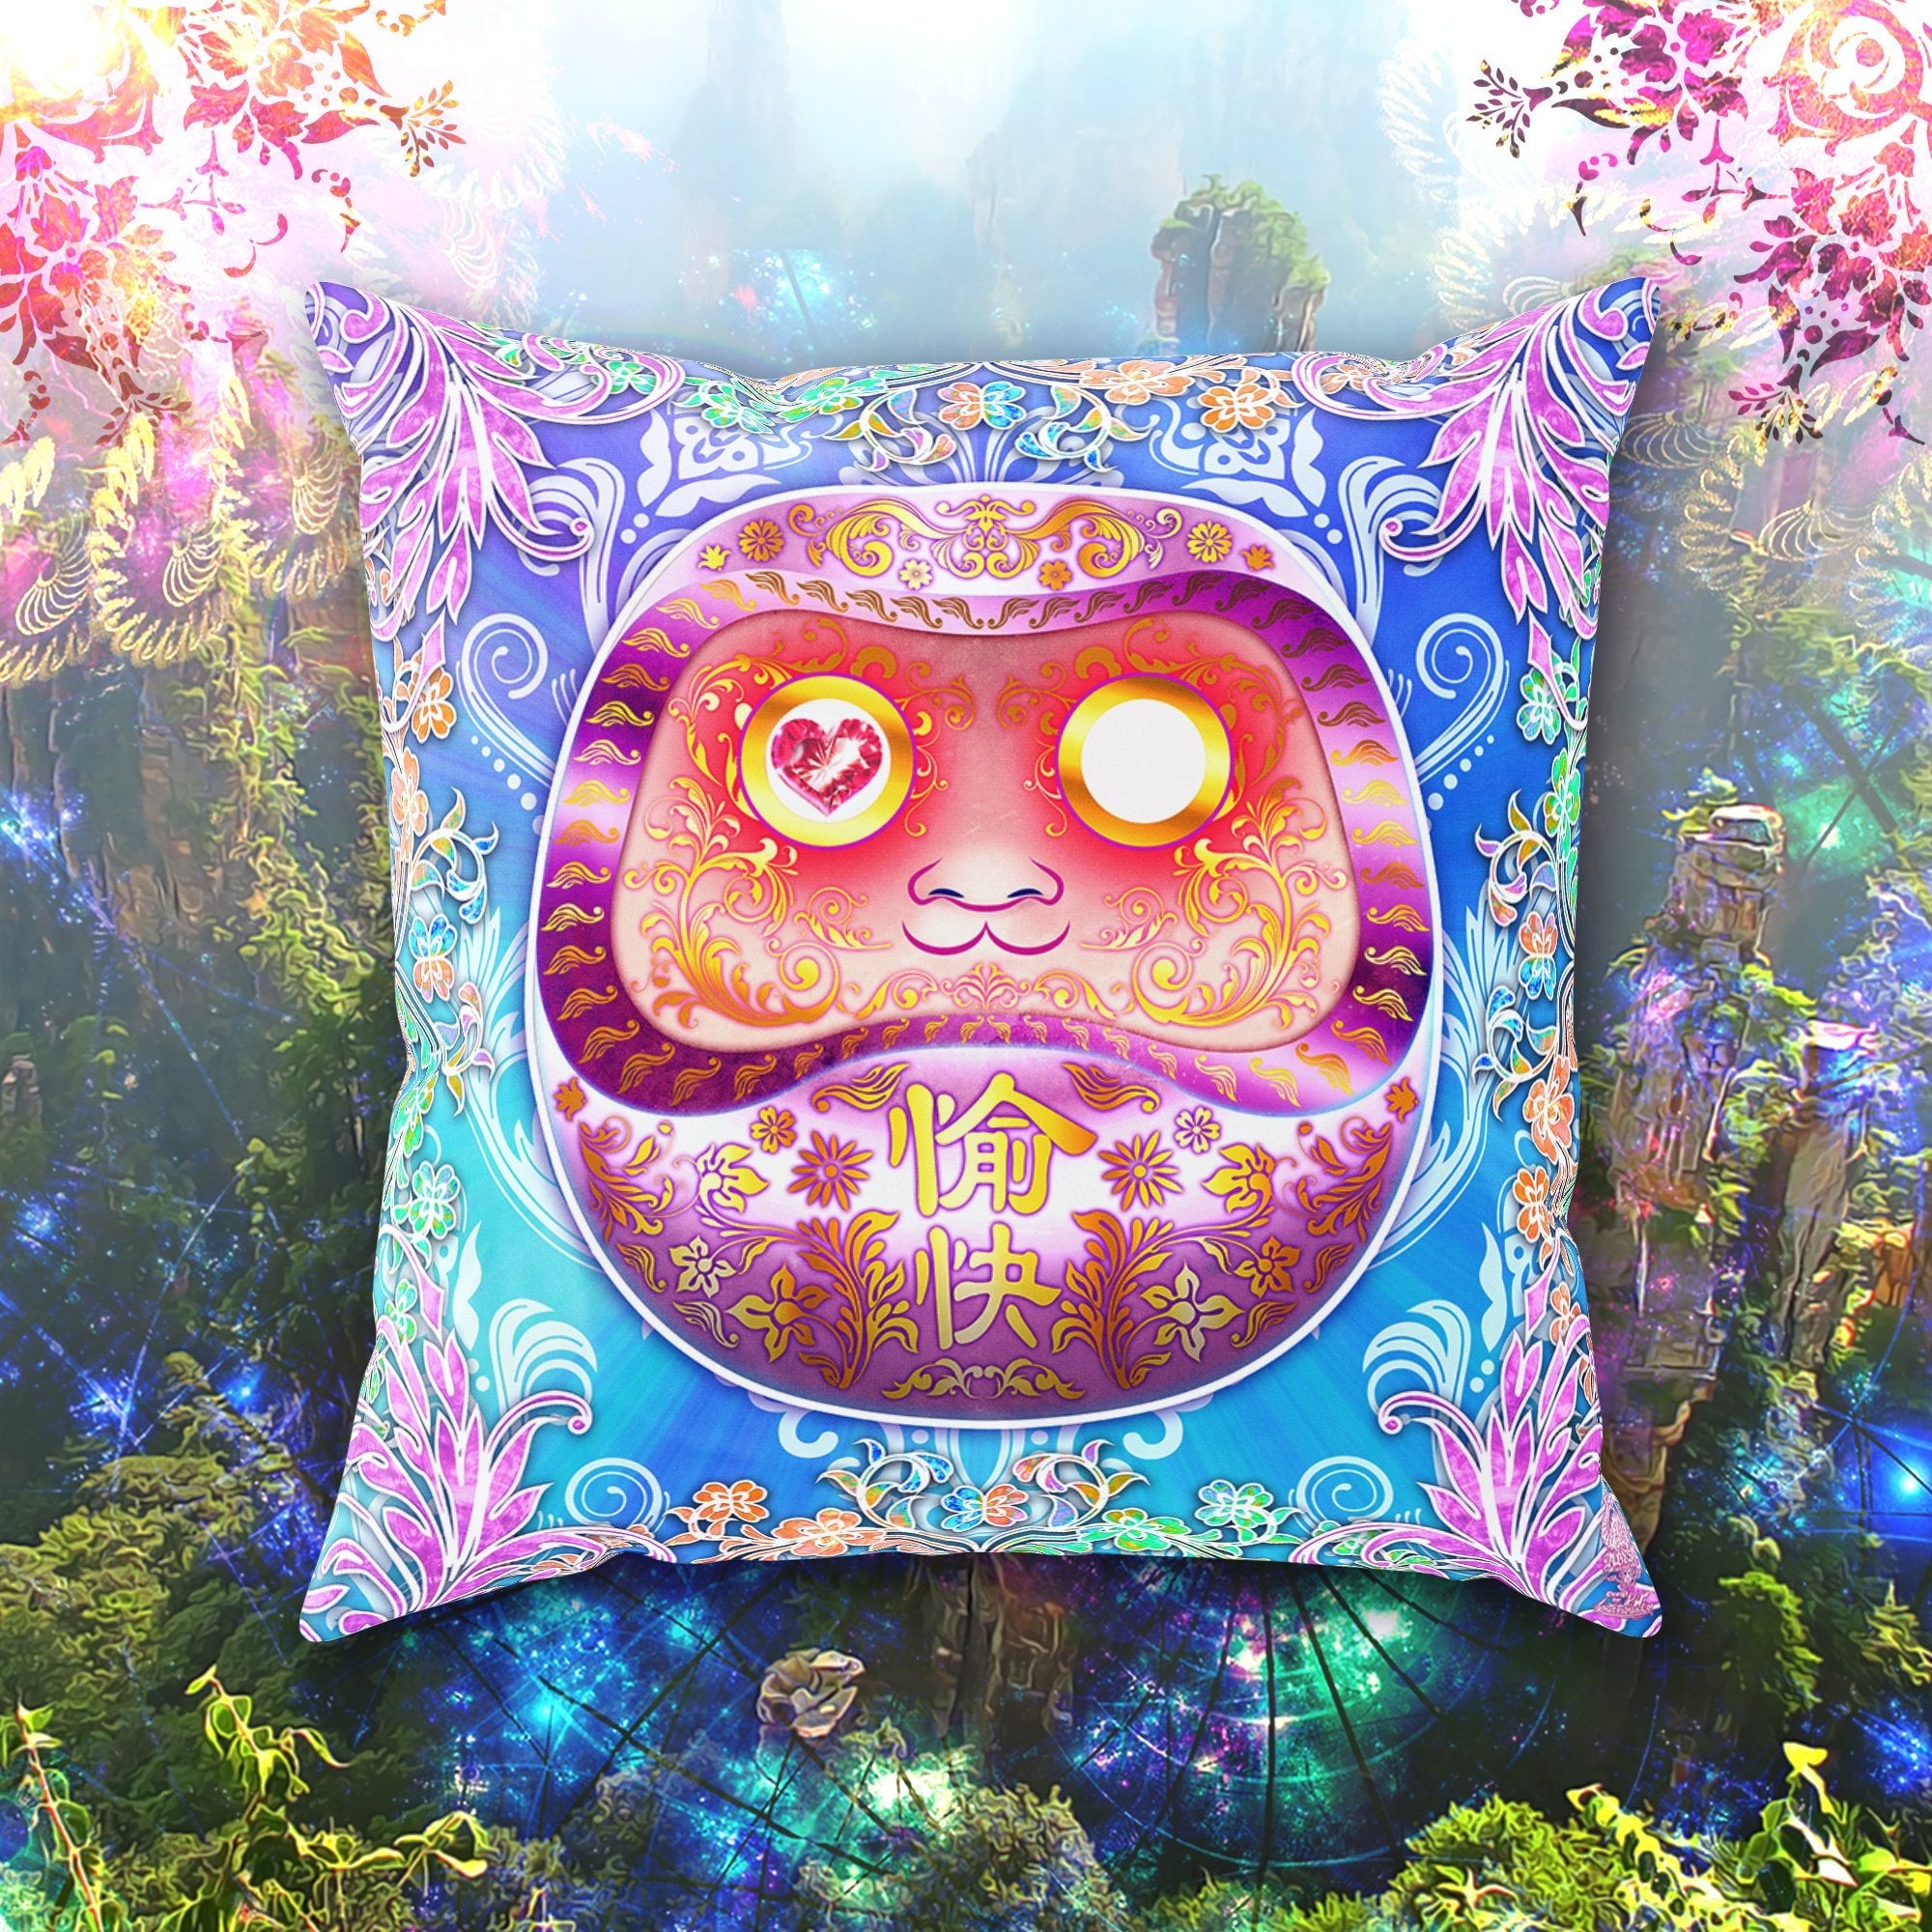 Kawaii Throw Pillow, Decorative Accent Cushion, Japanese Anime and Girl Gamer Room Decor, Funky and Eclectic Home - Daruma, Holographic - Abysm Internal